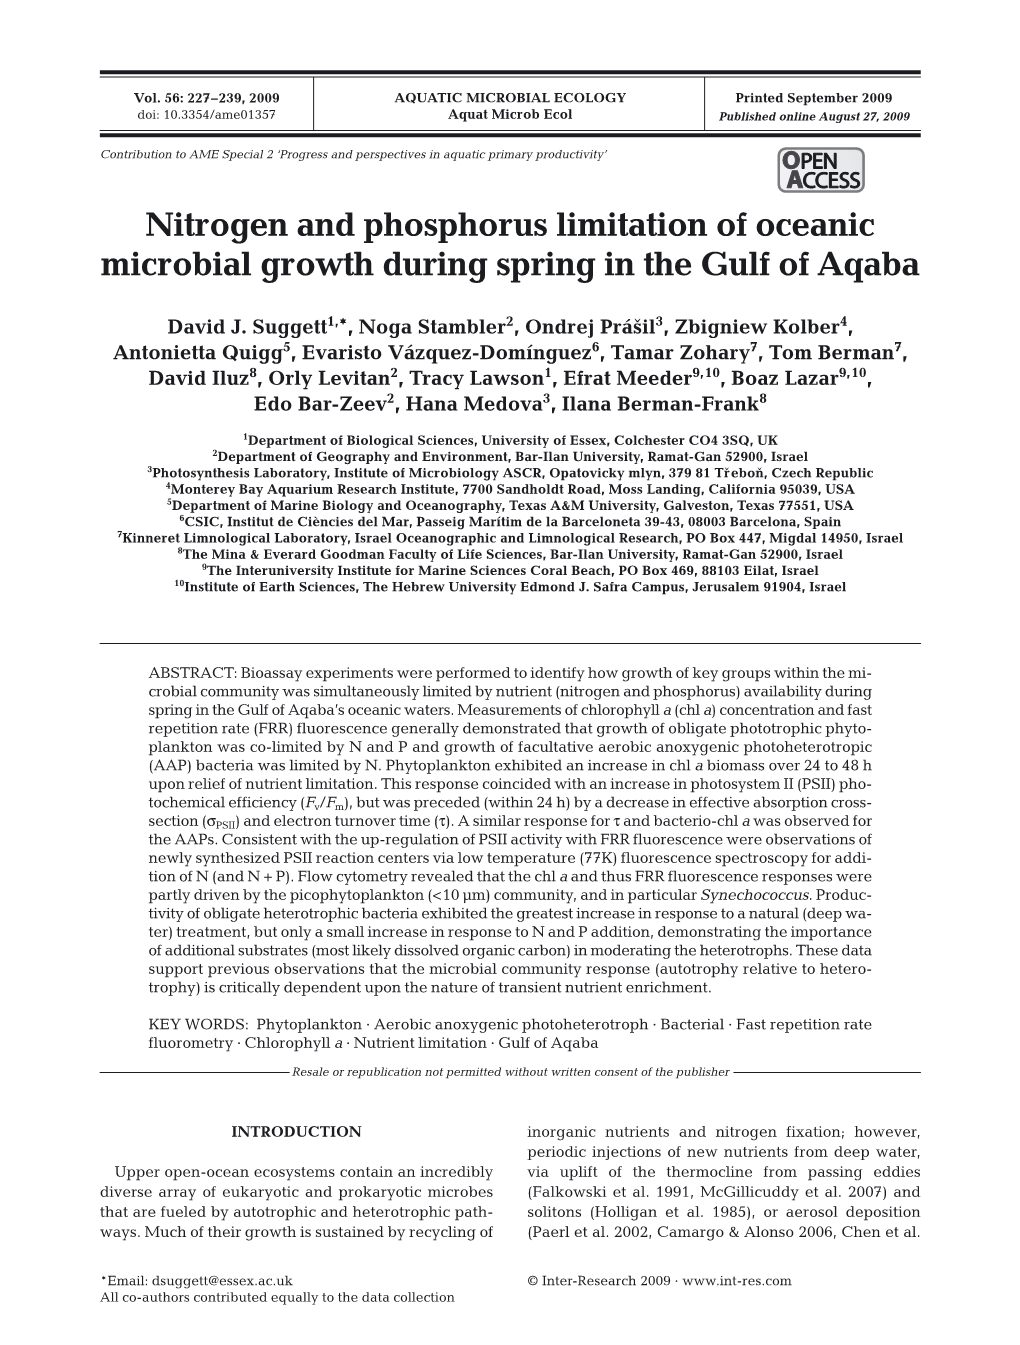 Nitrogen and Phosphorus Limitation of Oceanic Microbial Growth During Spring in the Gulf of Aqaba